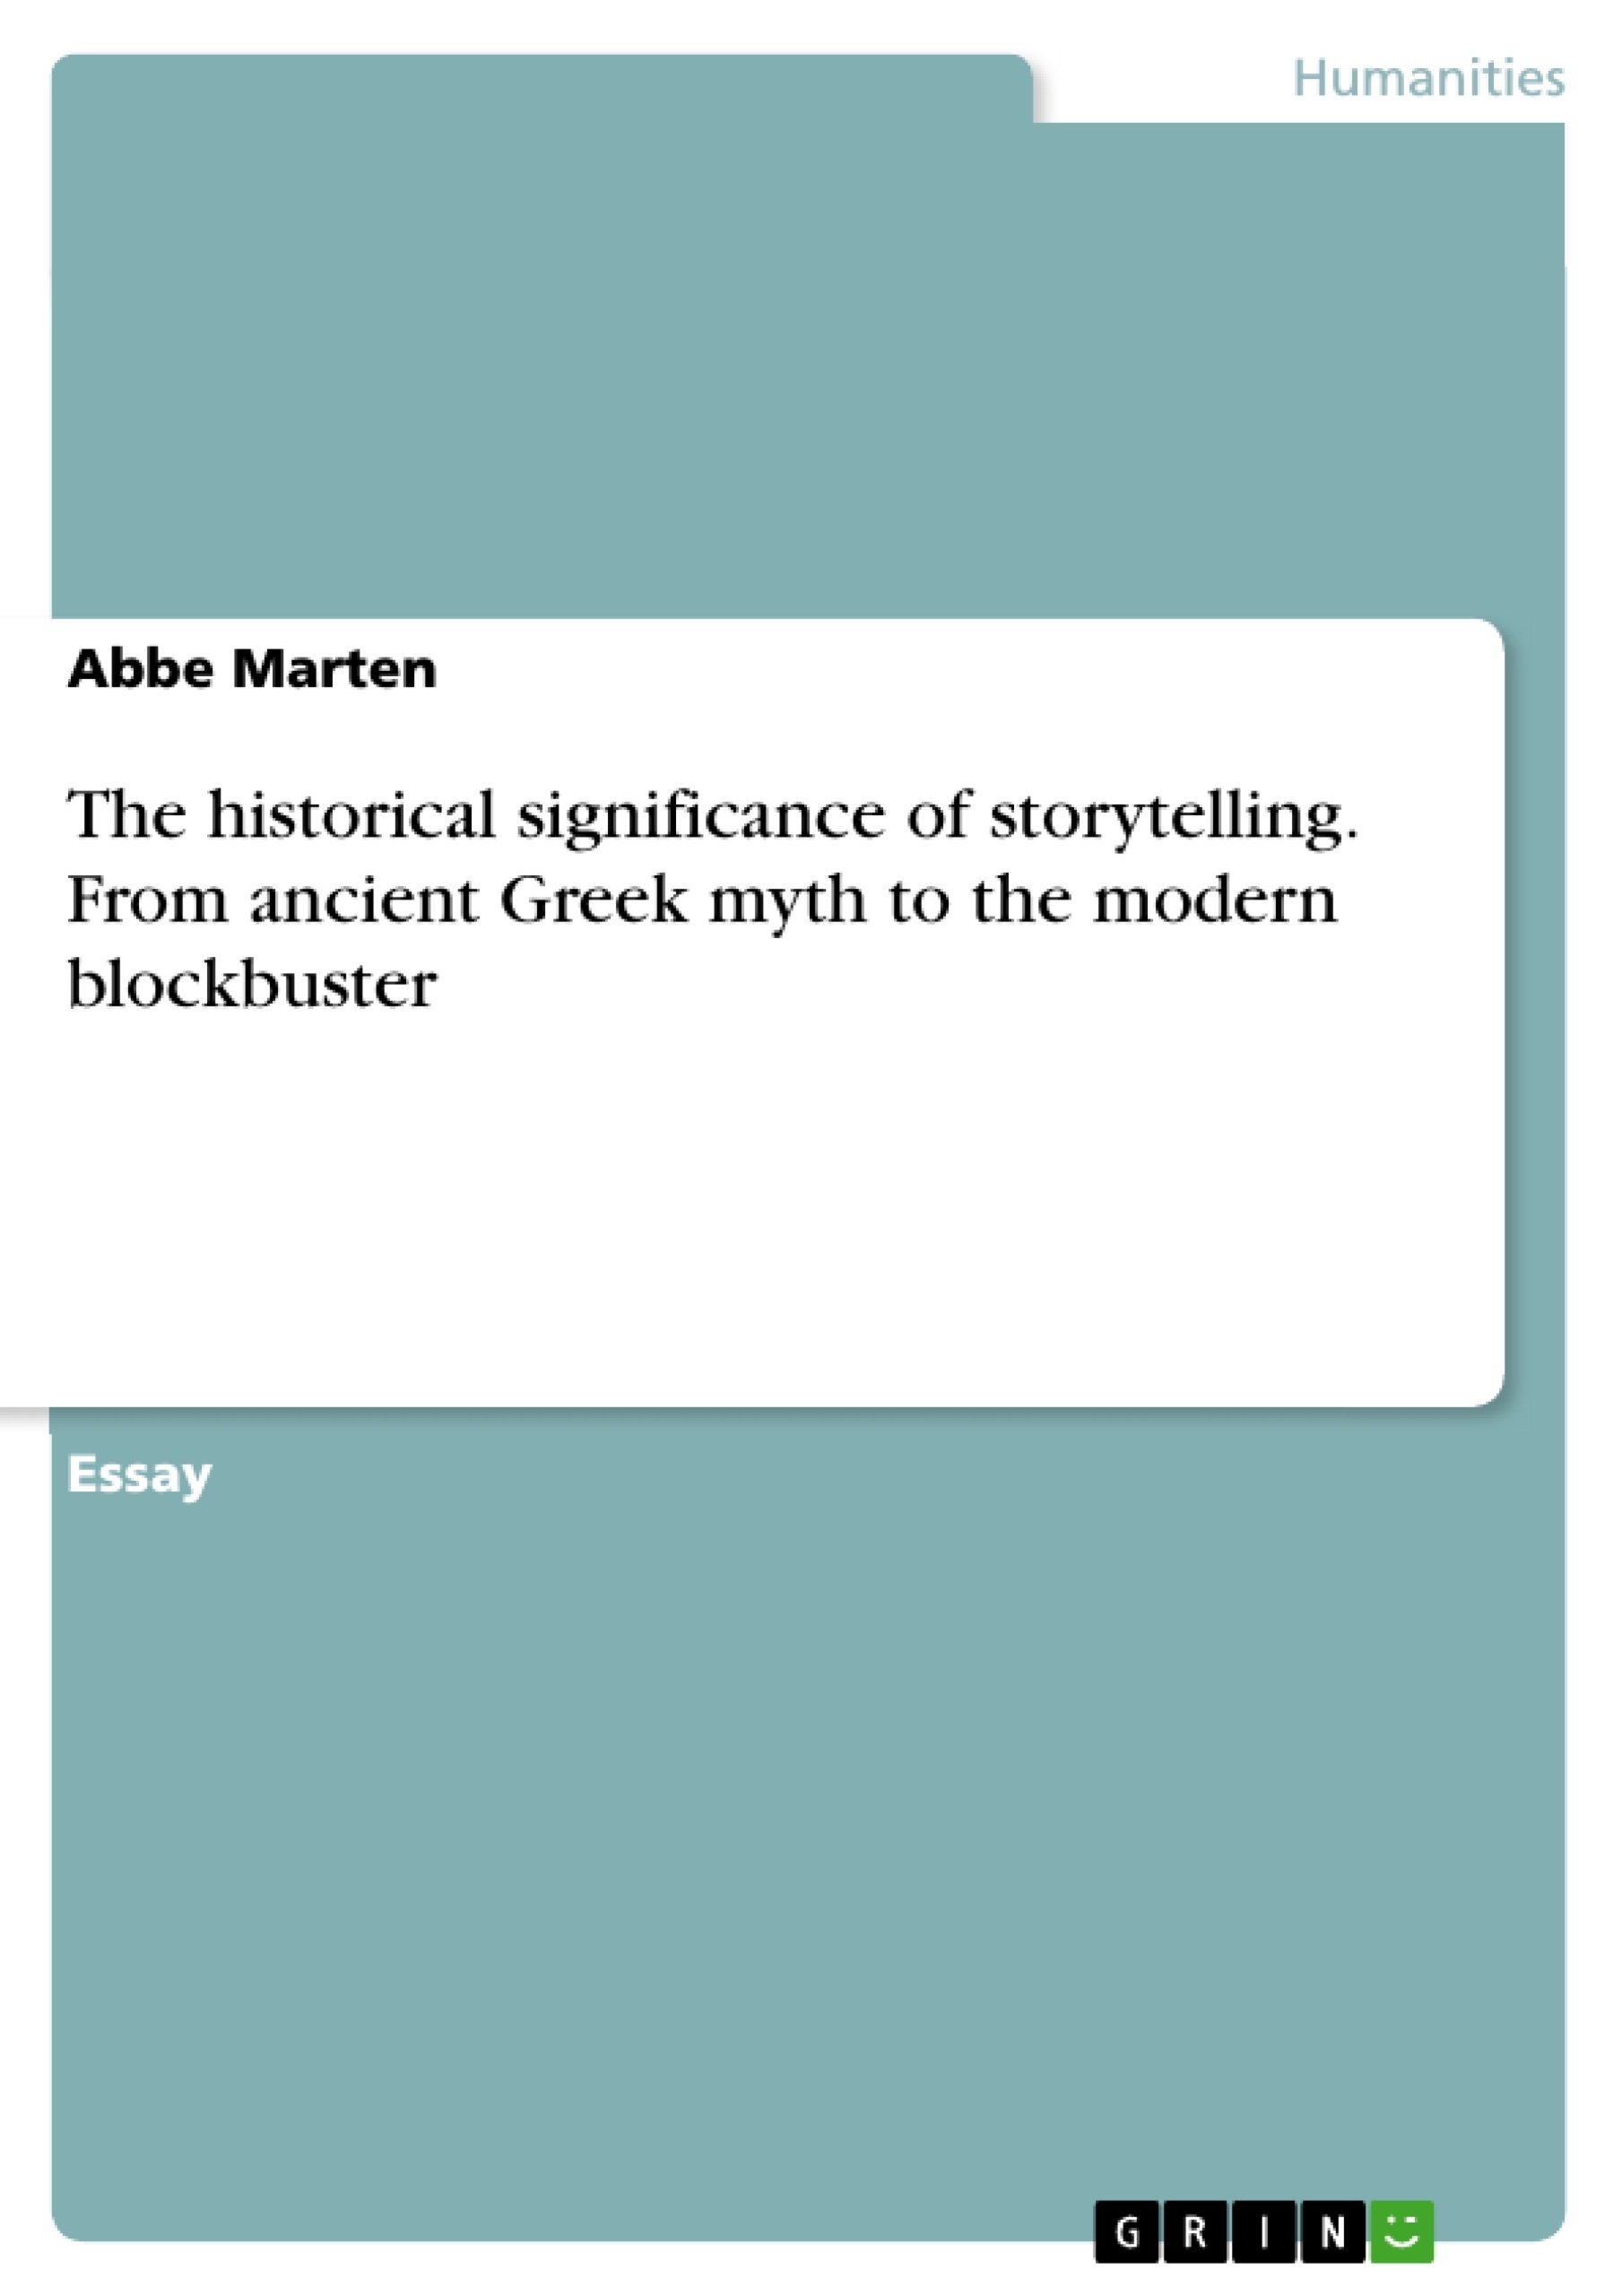 Titre: The historical significance of storytelling. From ancient Greek myth to the modern blockbuster